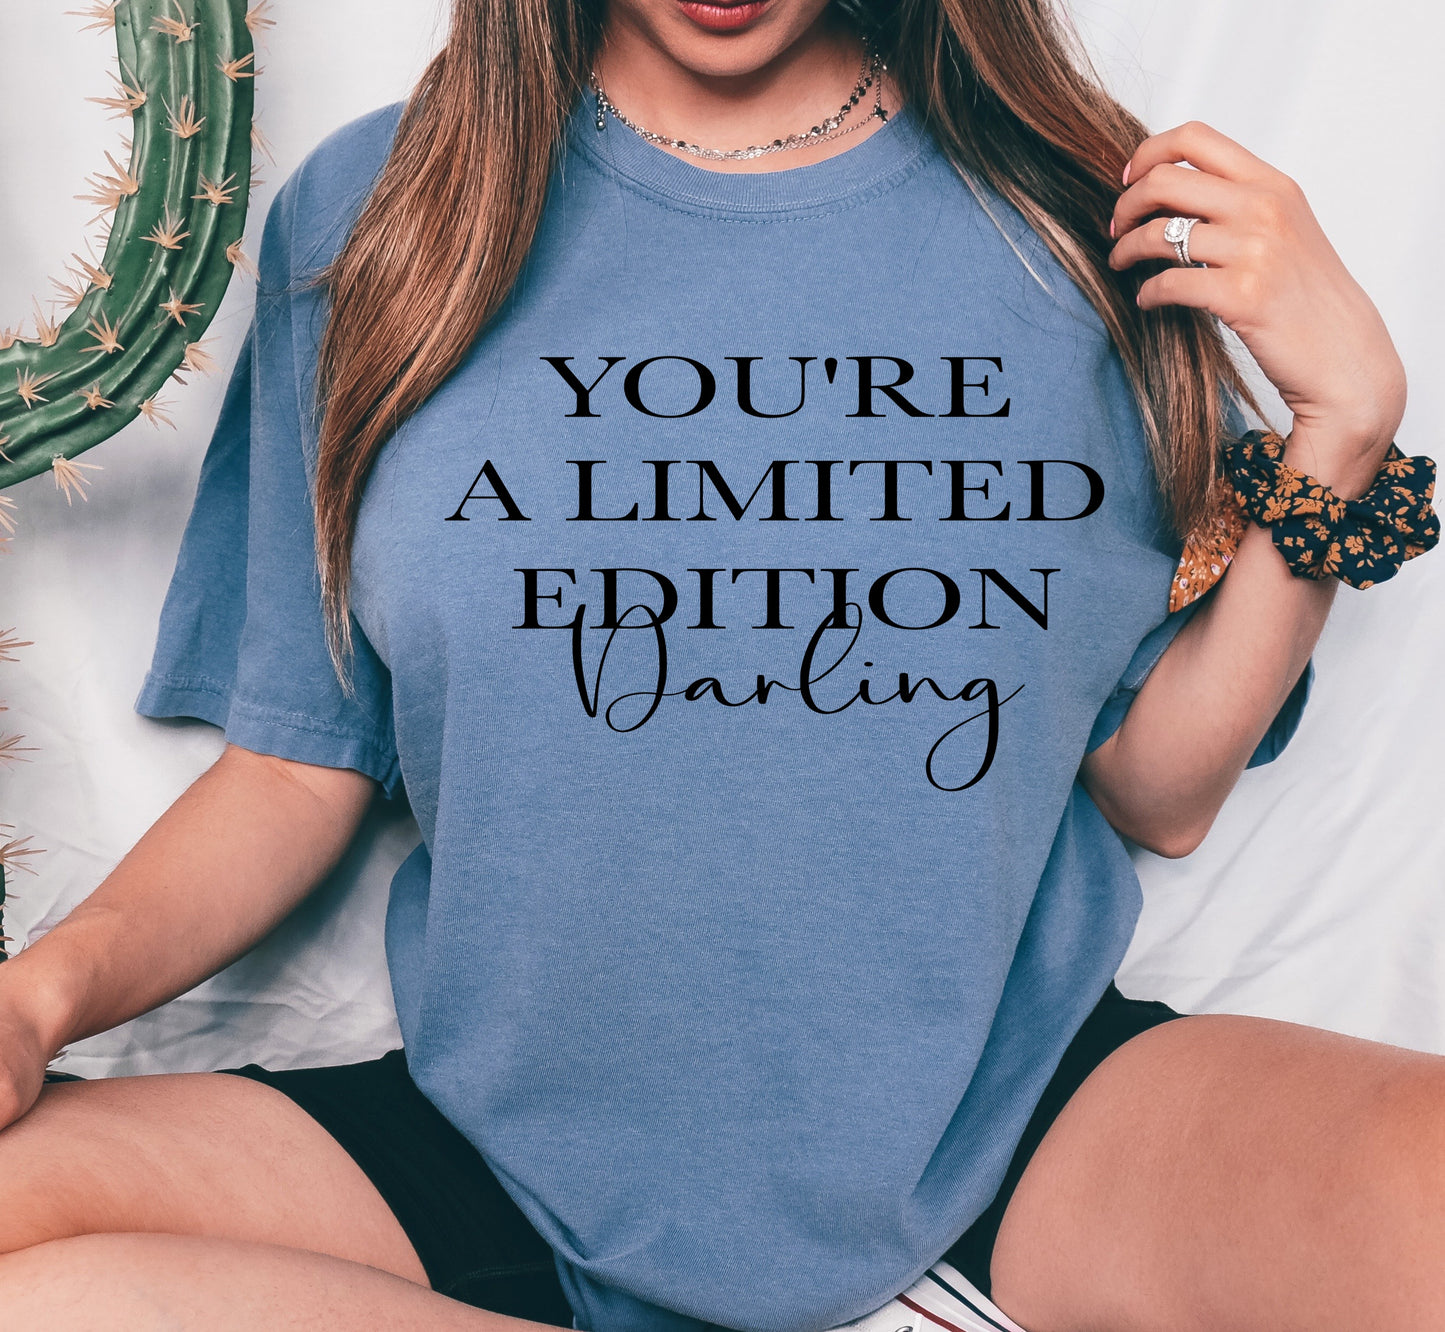 You're a Limited Edition Darling